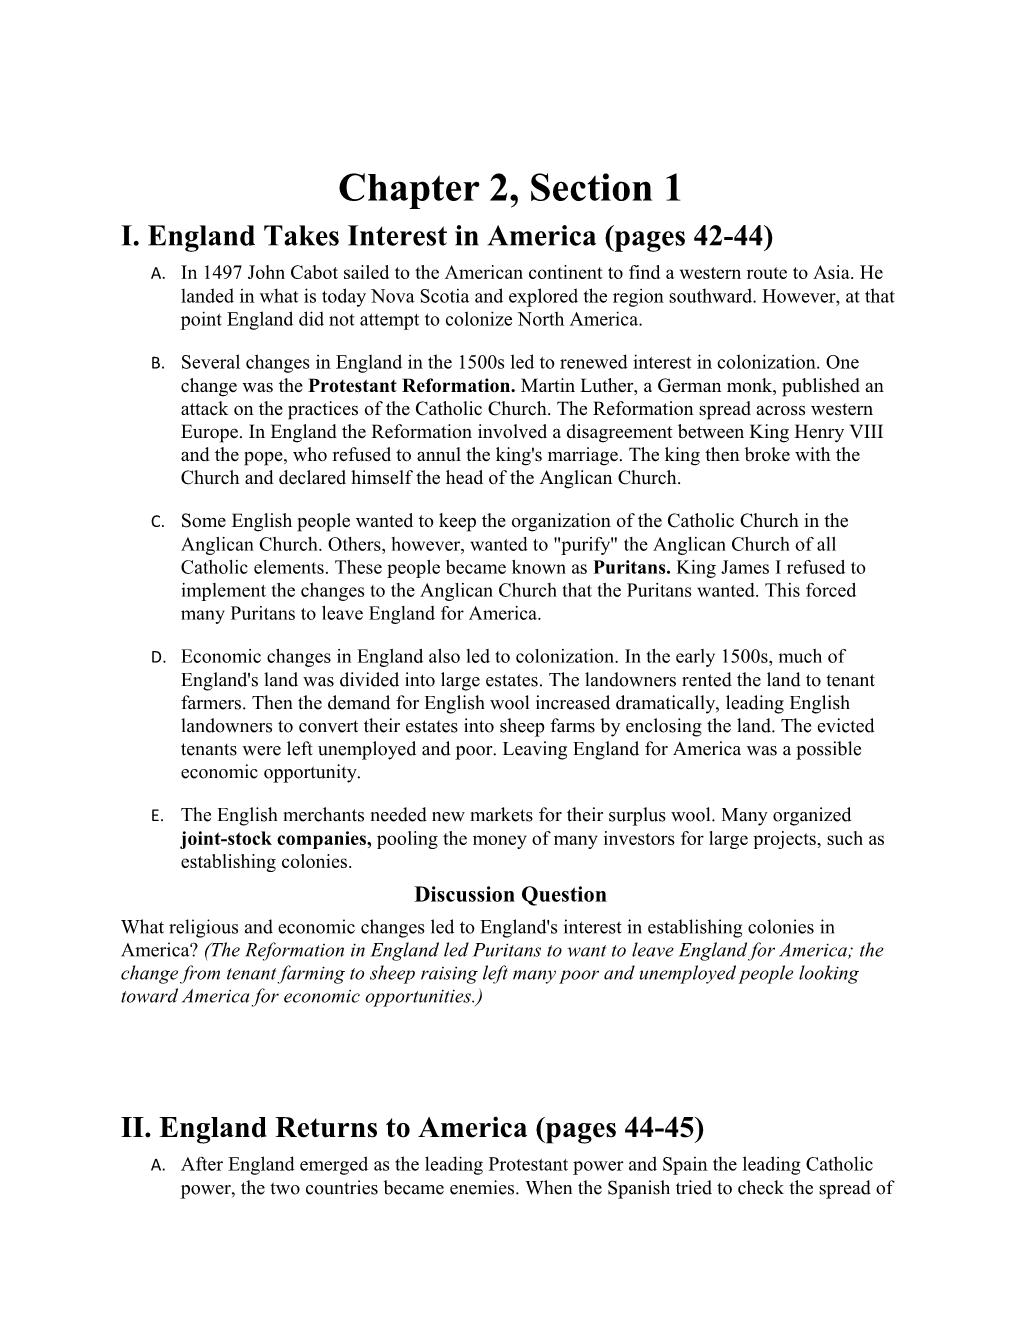 I. England Takes Interest in America (Pages 42-44)